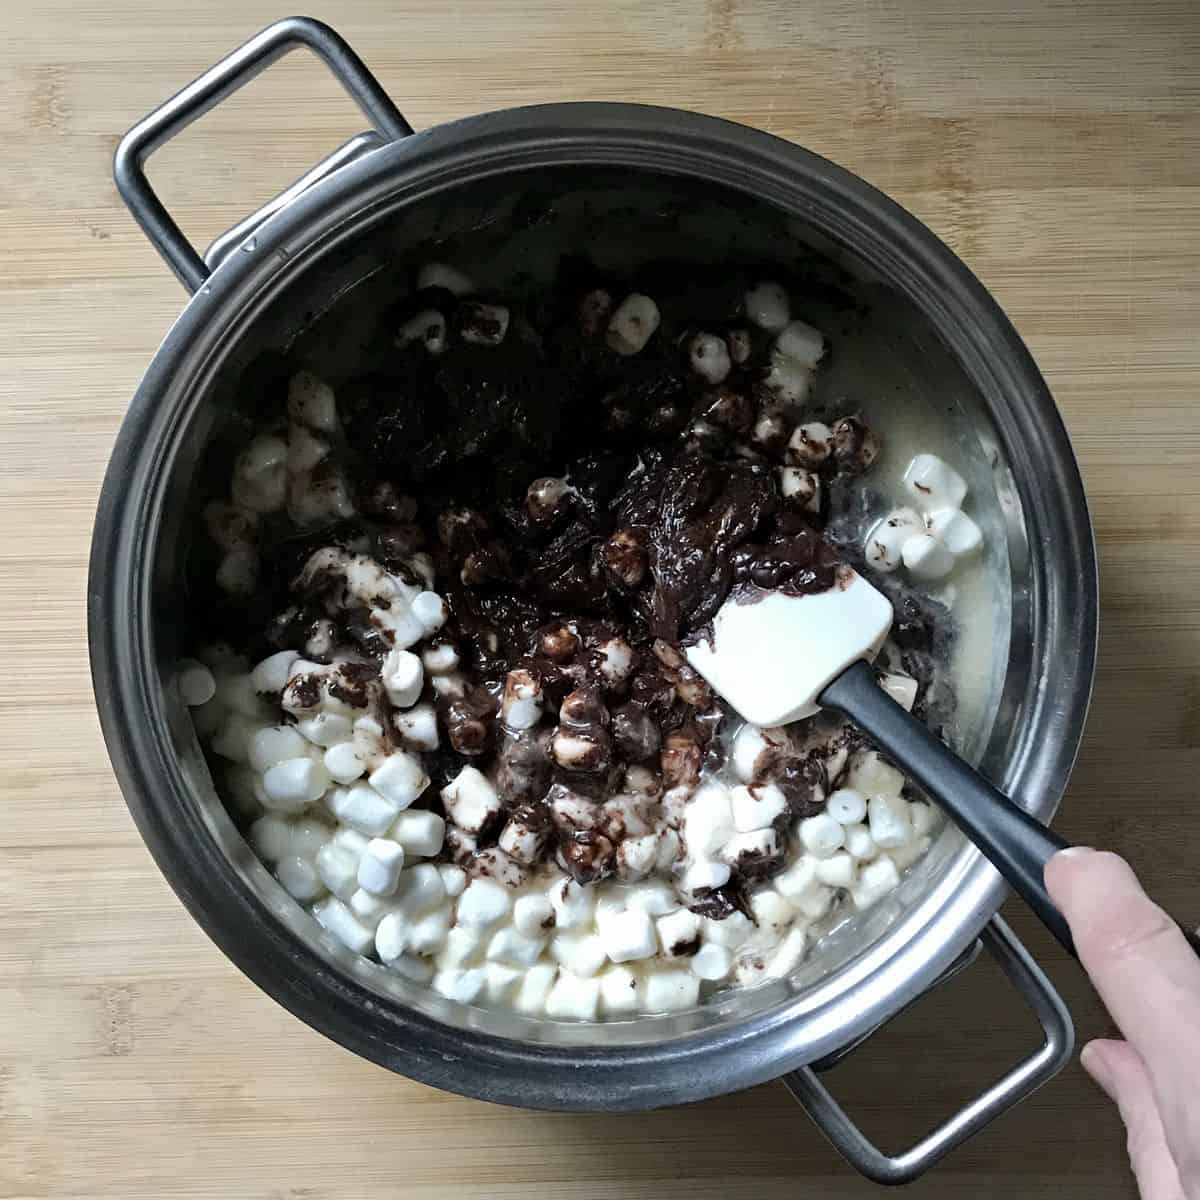 Mini marshmallows and chocolate chips are stirred to make fudge.